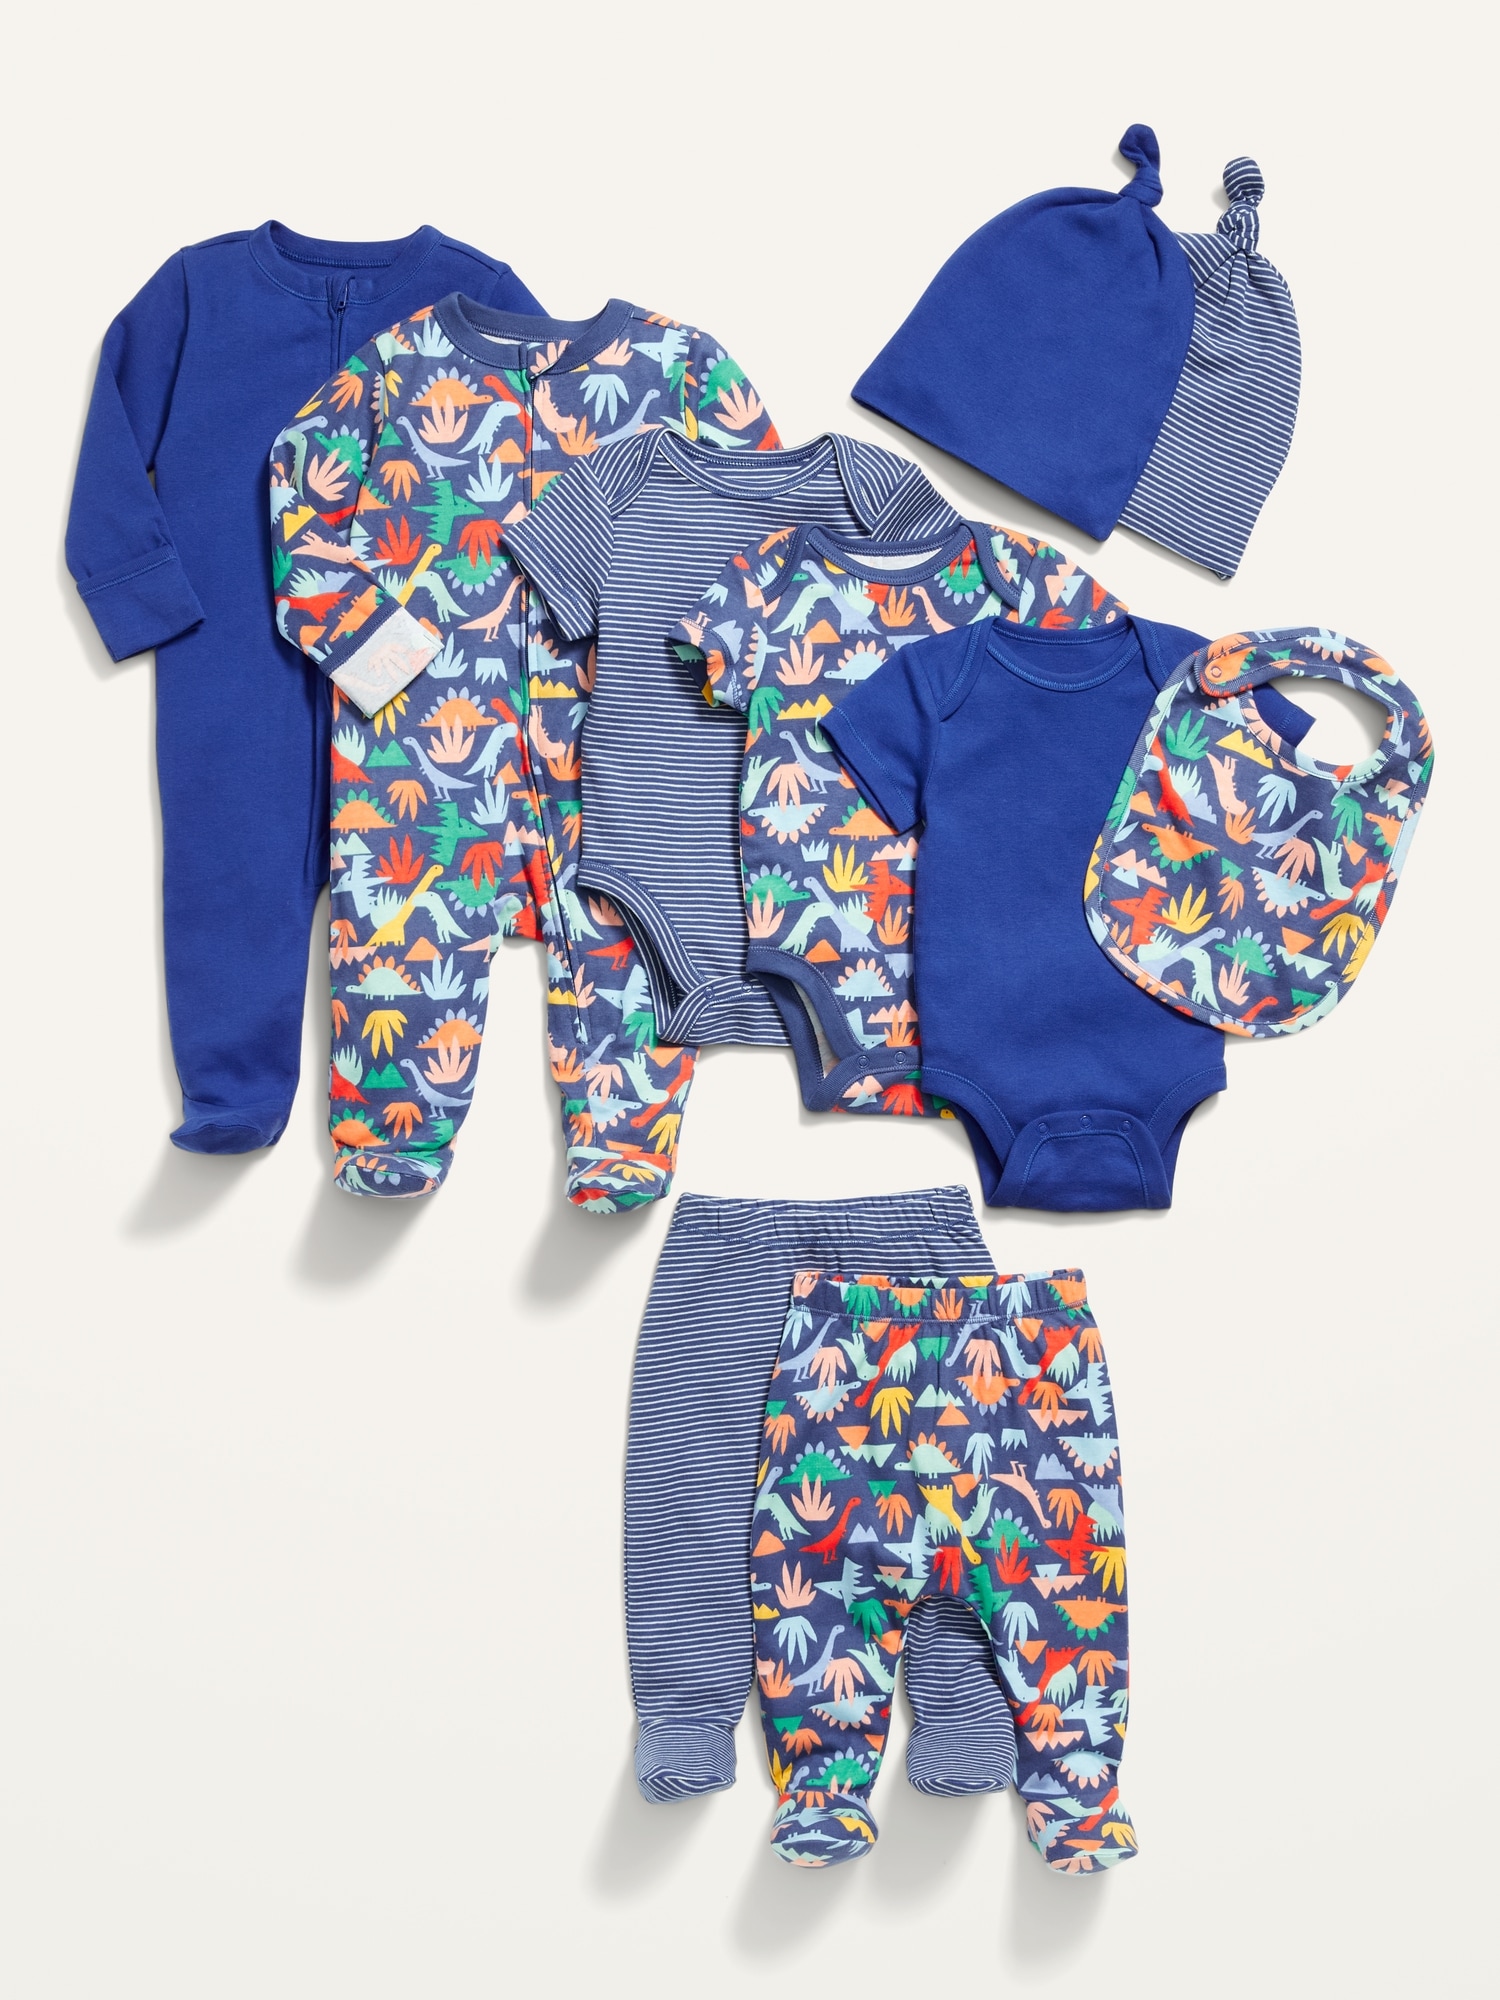 Old Navy Unisex 10-Piece Layette Set for Baby multi. 1